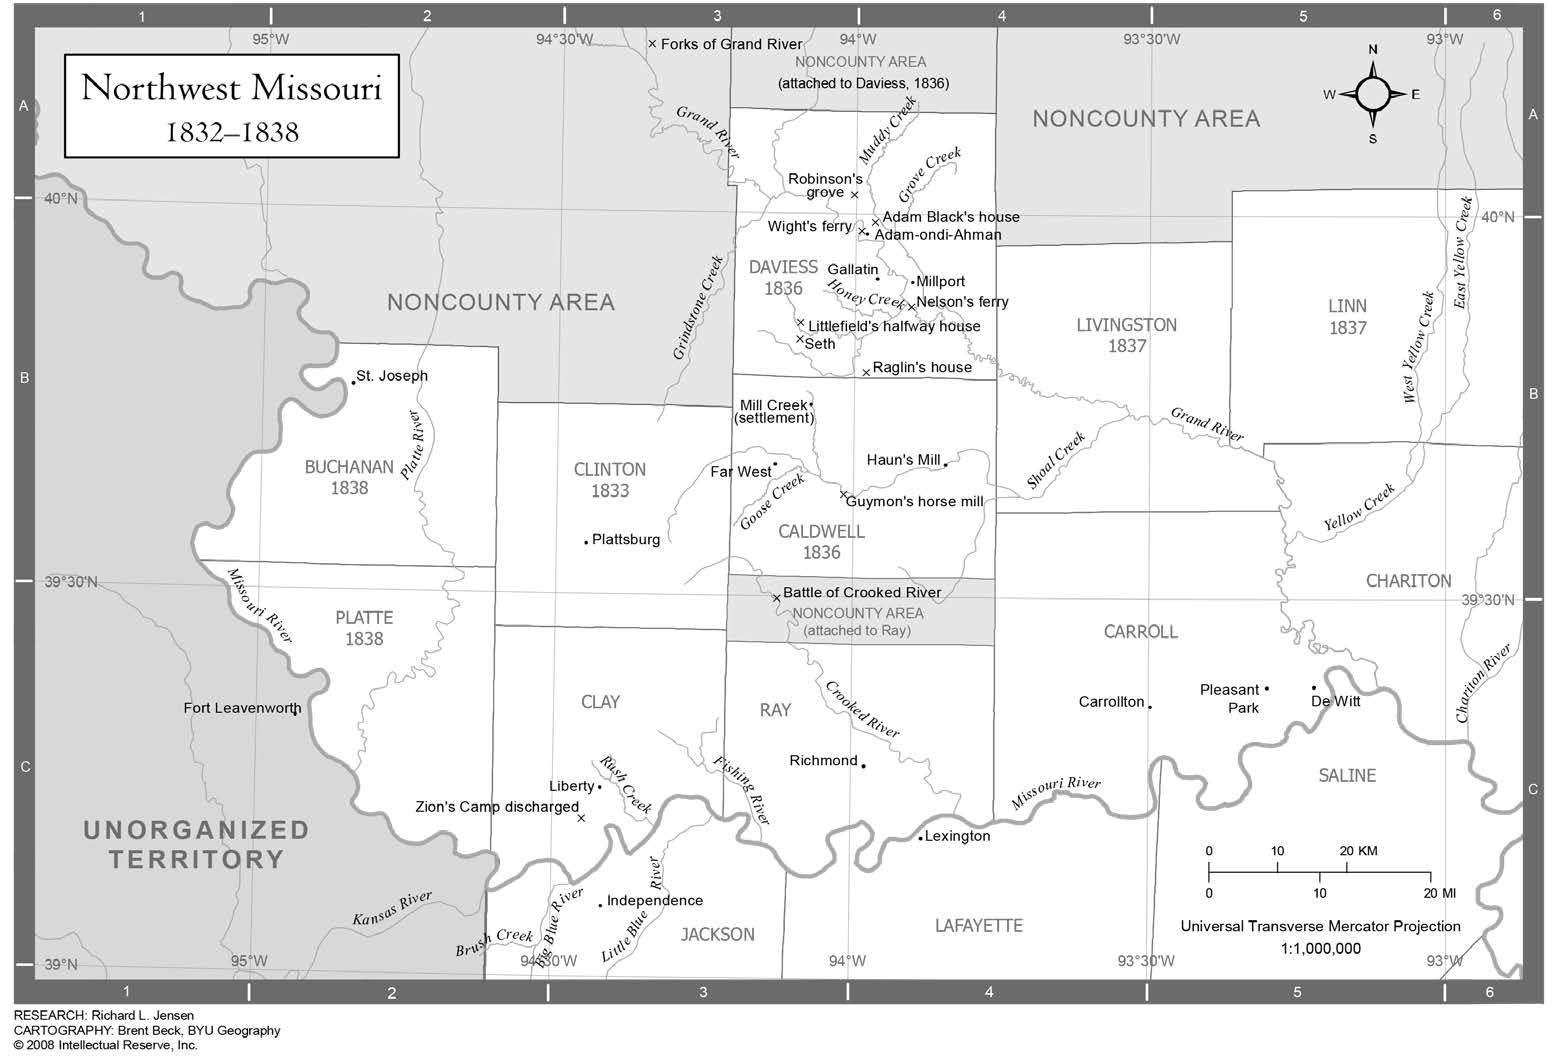 Northwest Missouri, 1832–1838. Courtesy of the Joseph Smith Papers Project.